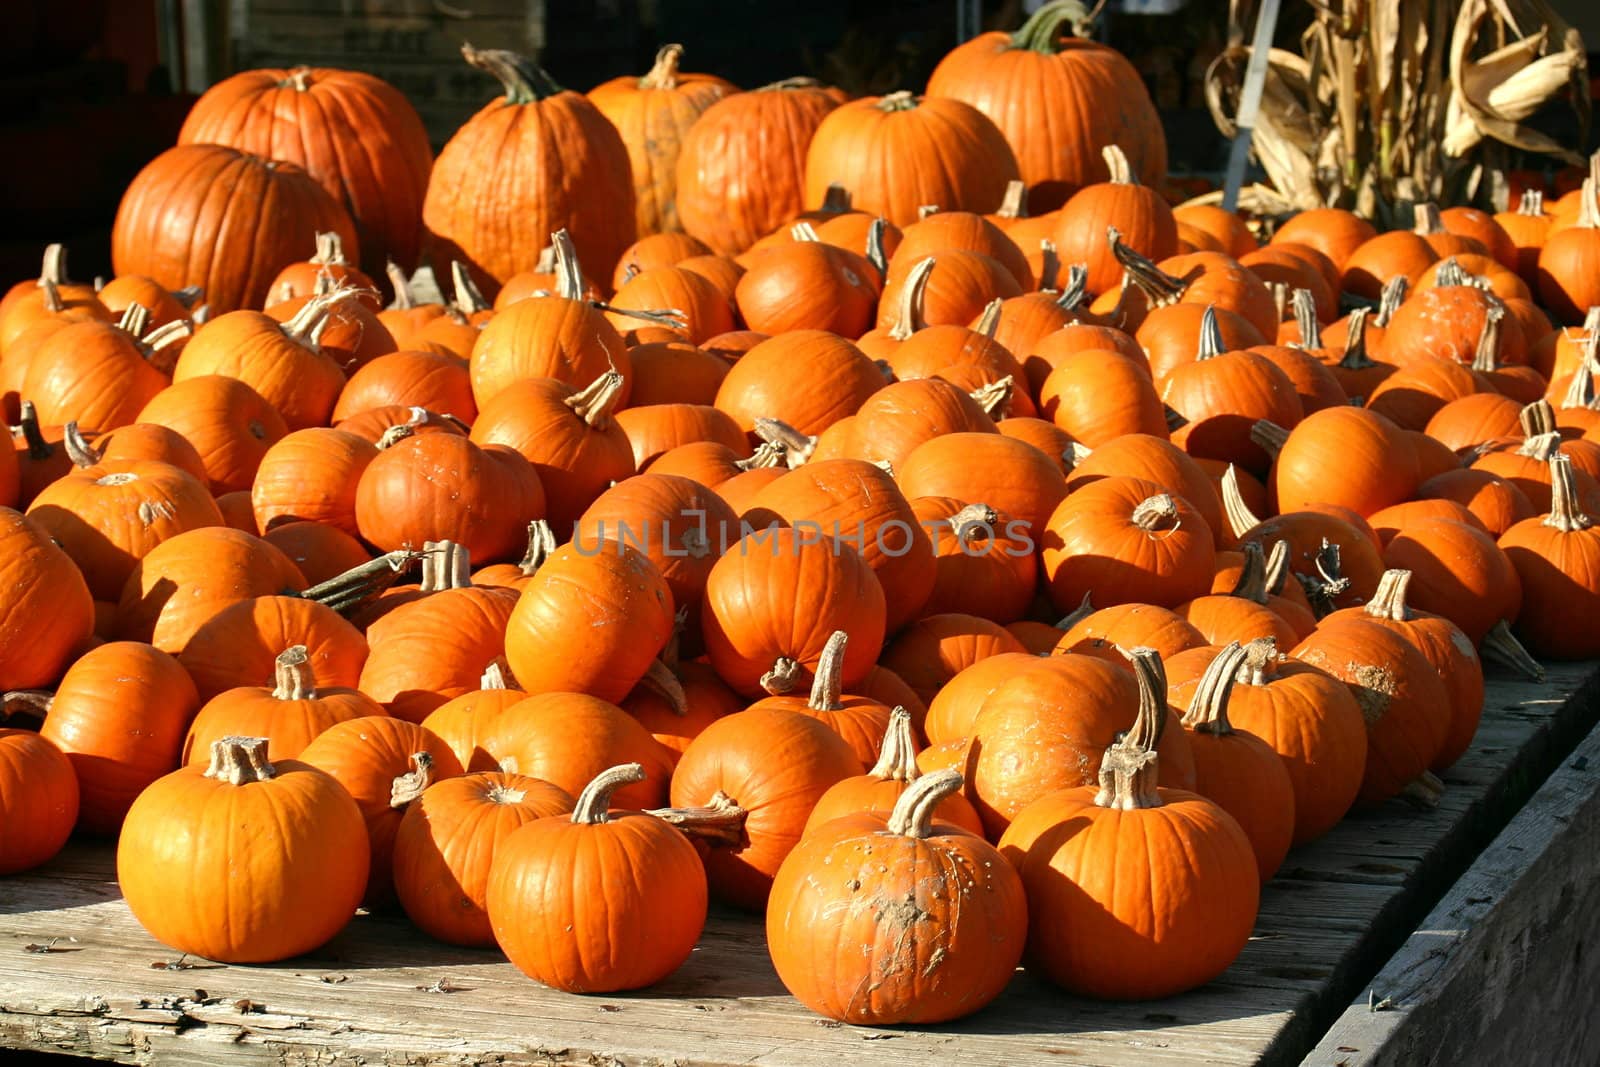 Pumpkins for Sale by dtouch1